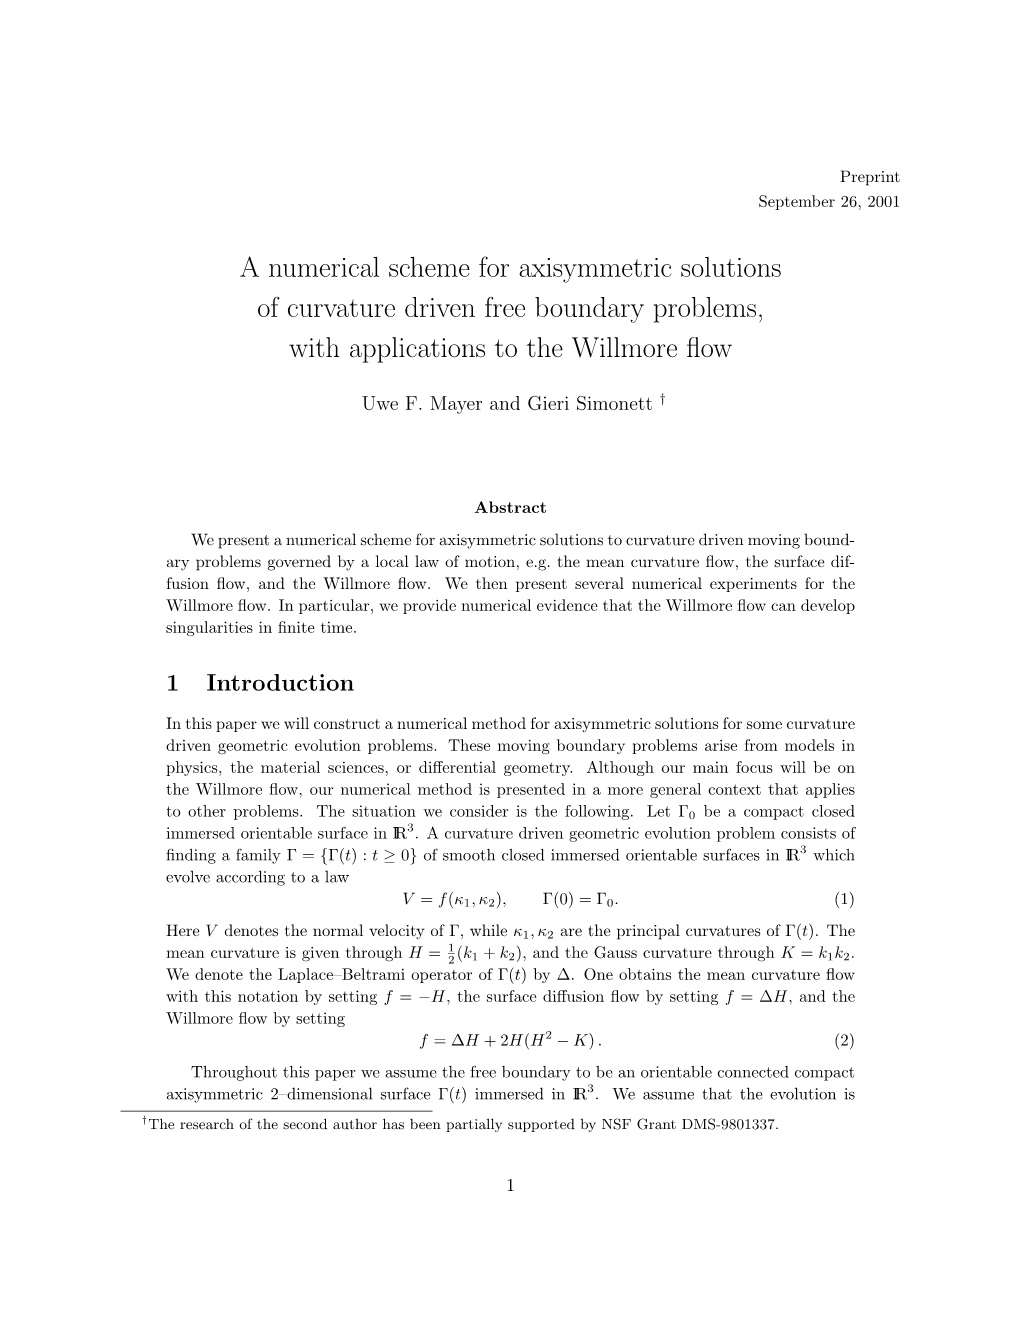 Numerical Solutions for the Willmore Flow